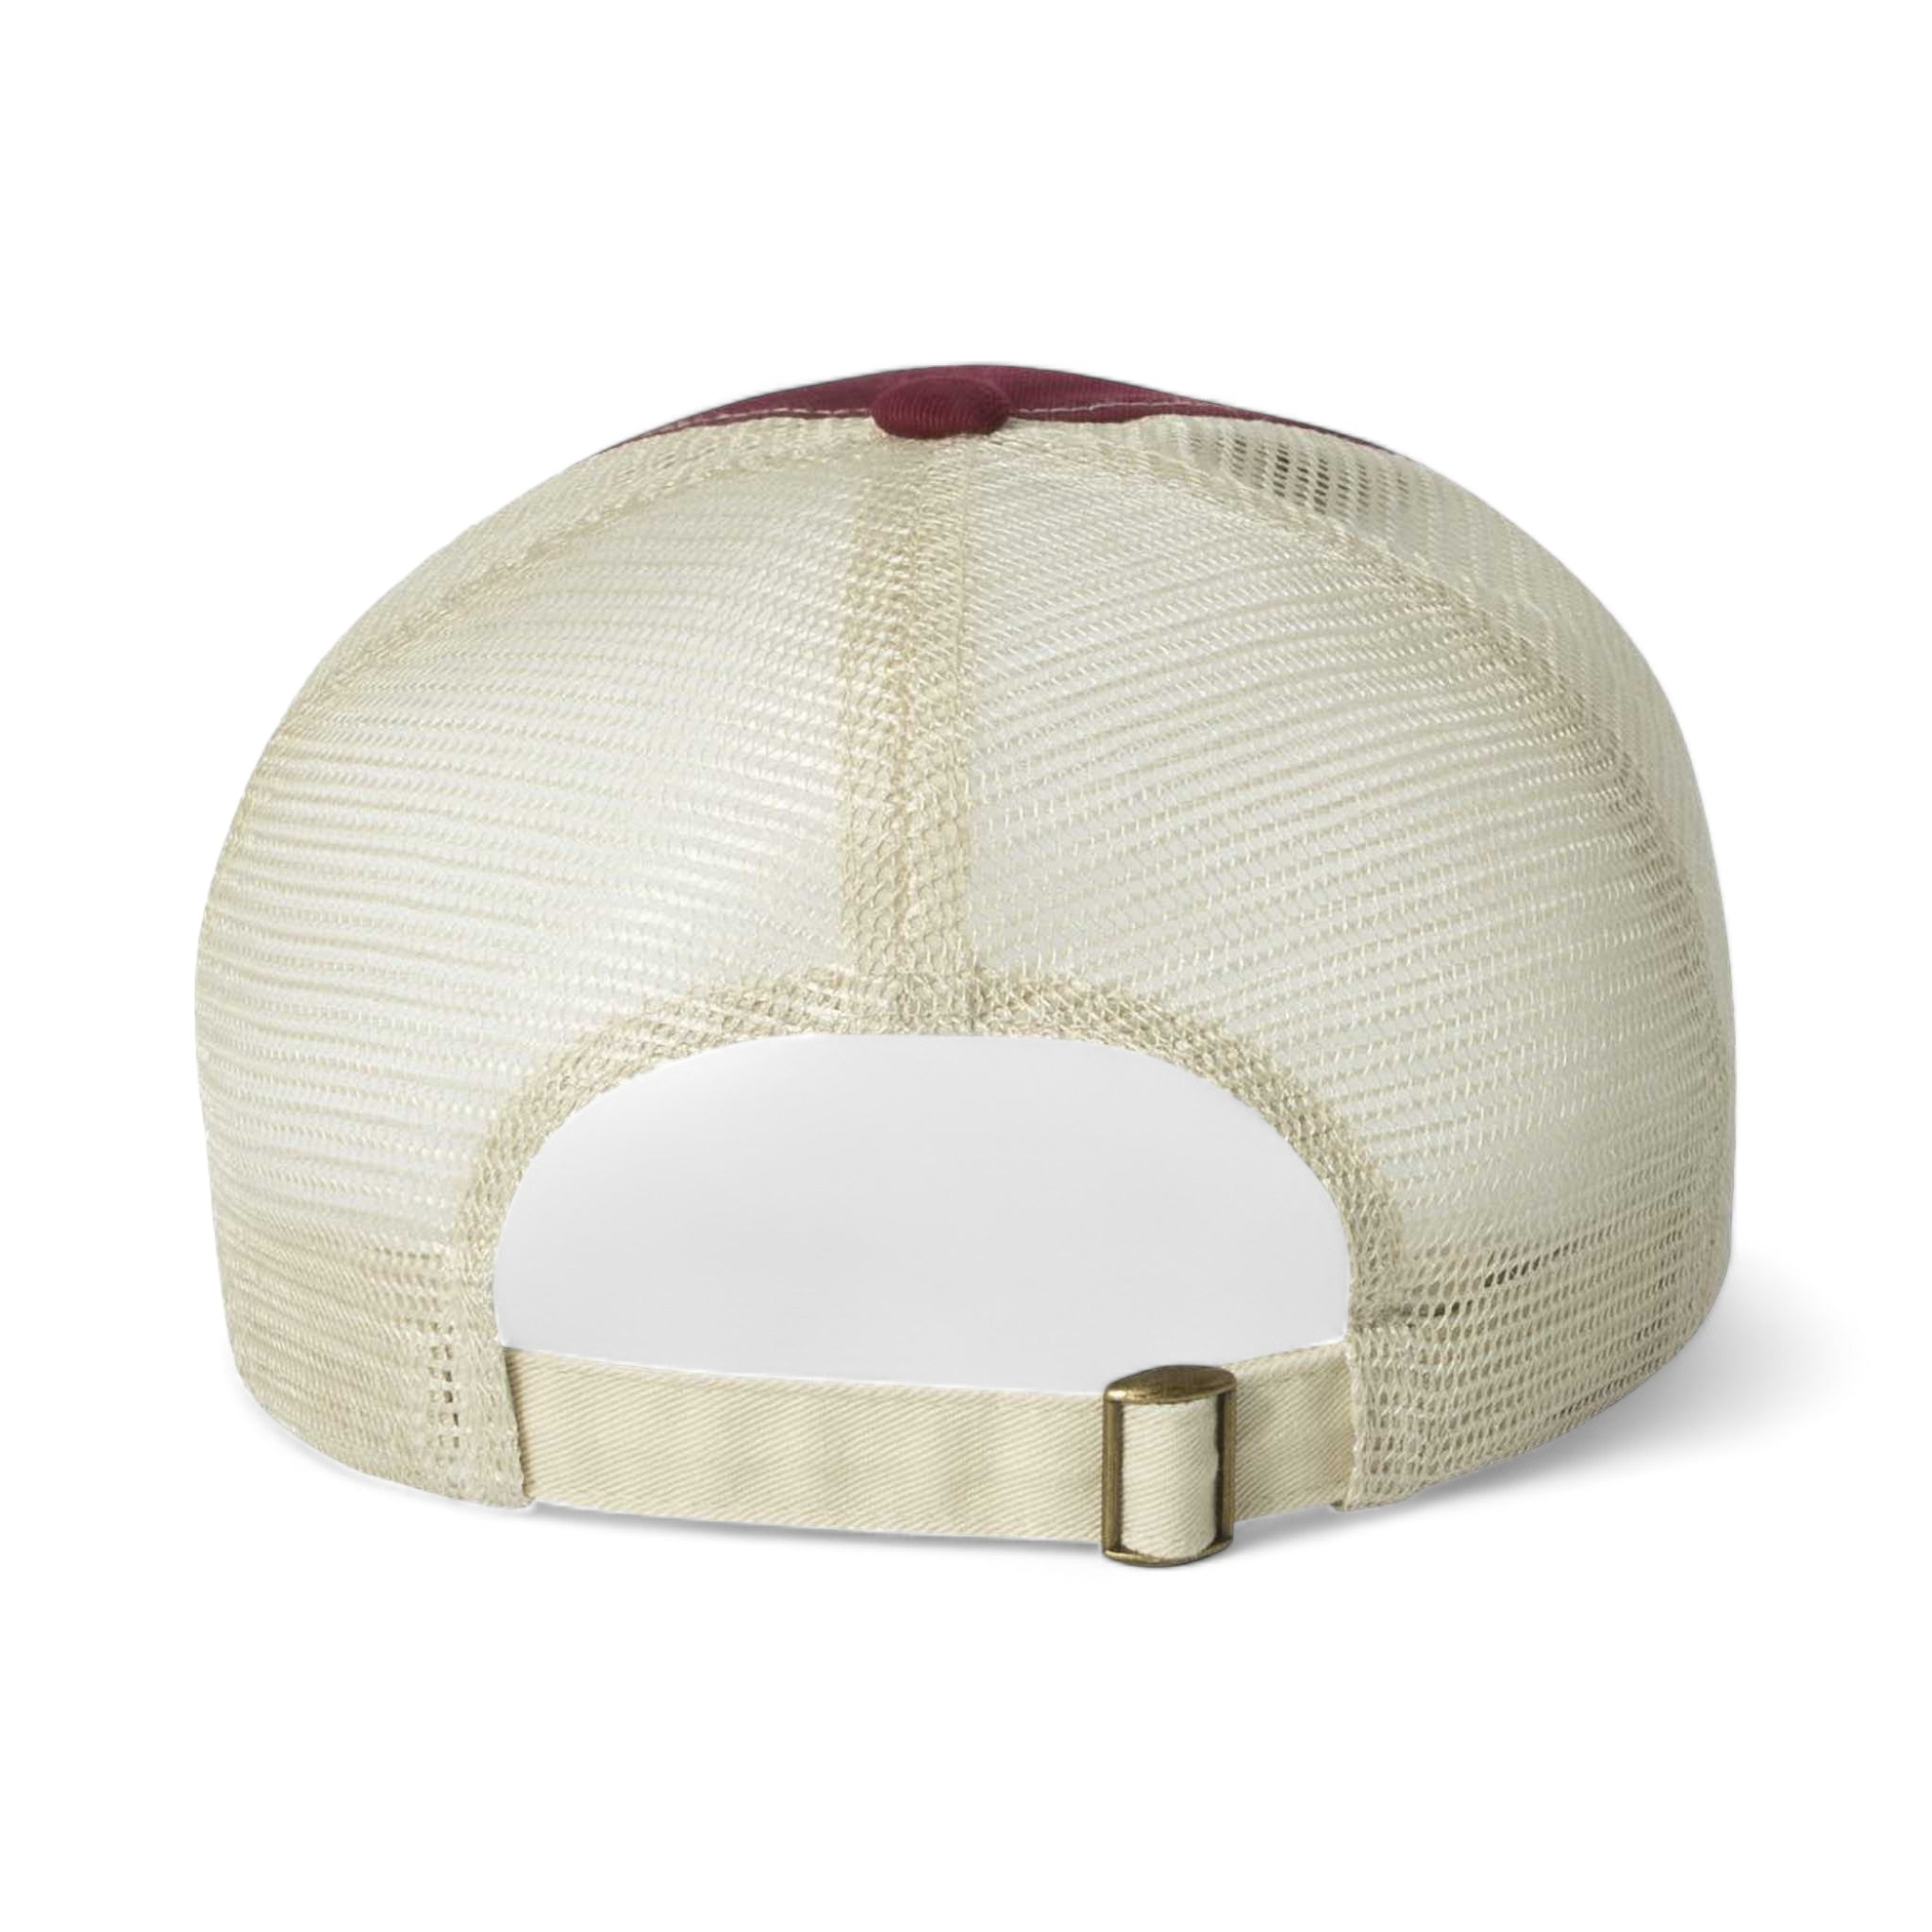 Back view of Sportsman 3100 custom hat in maroon and stone